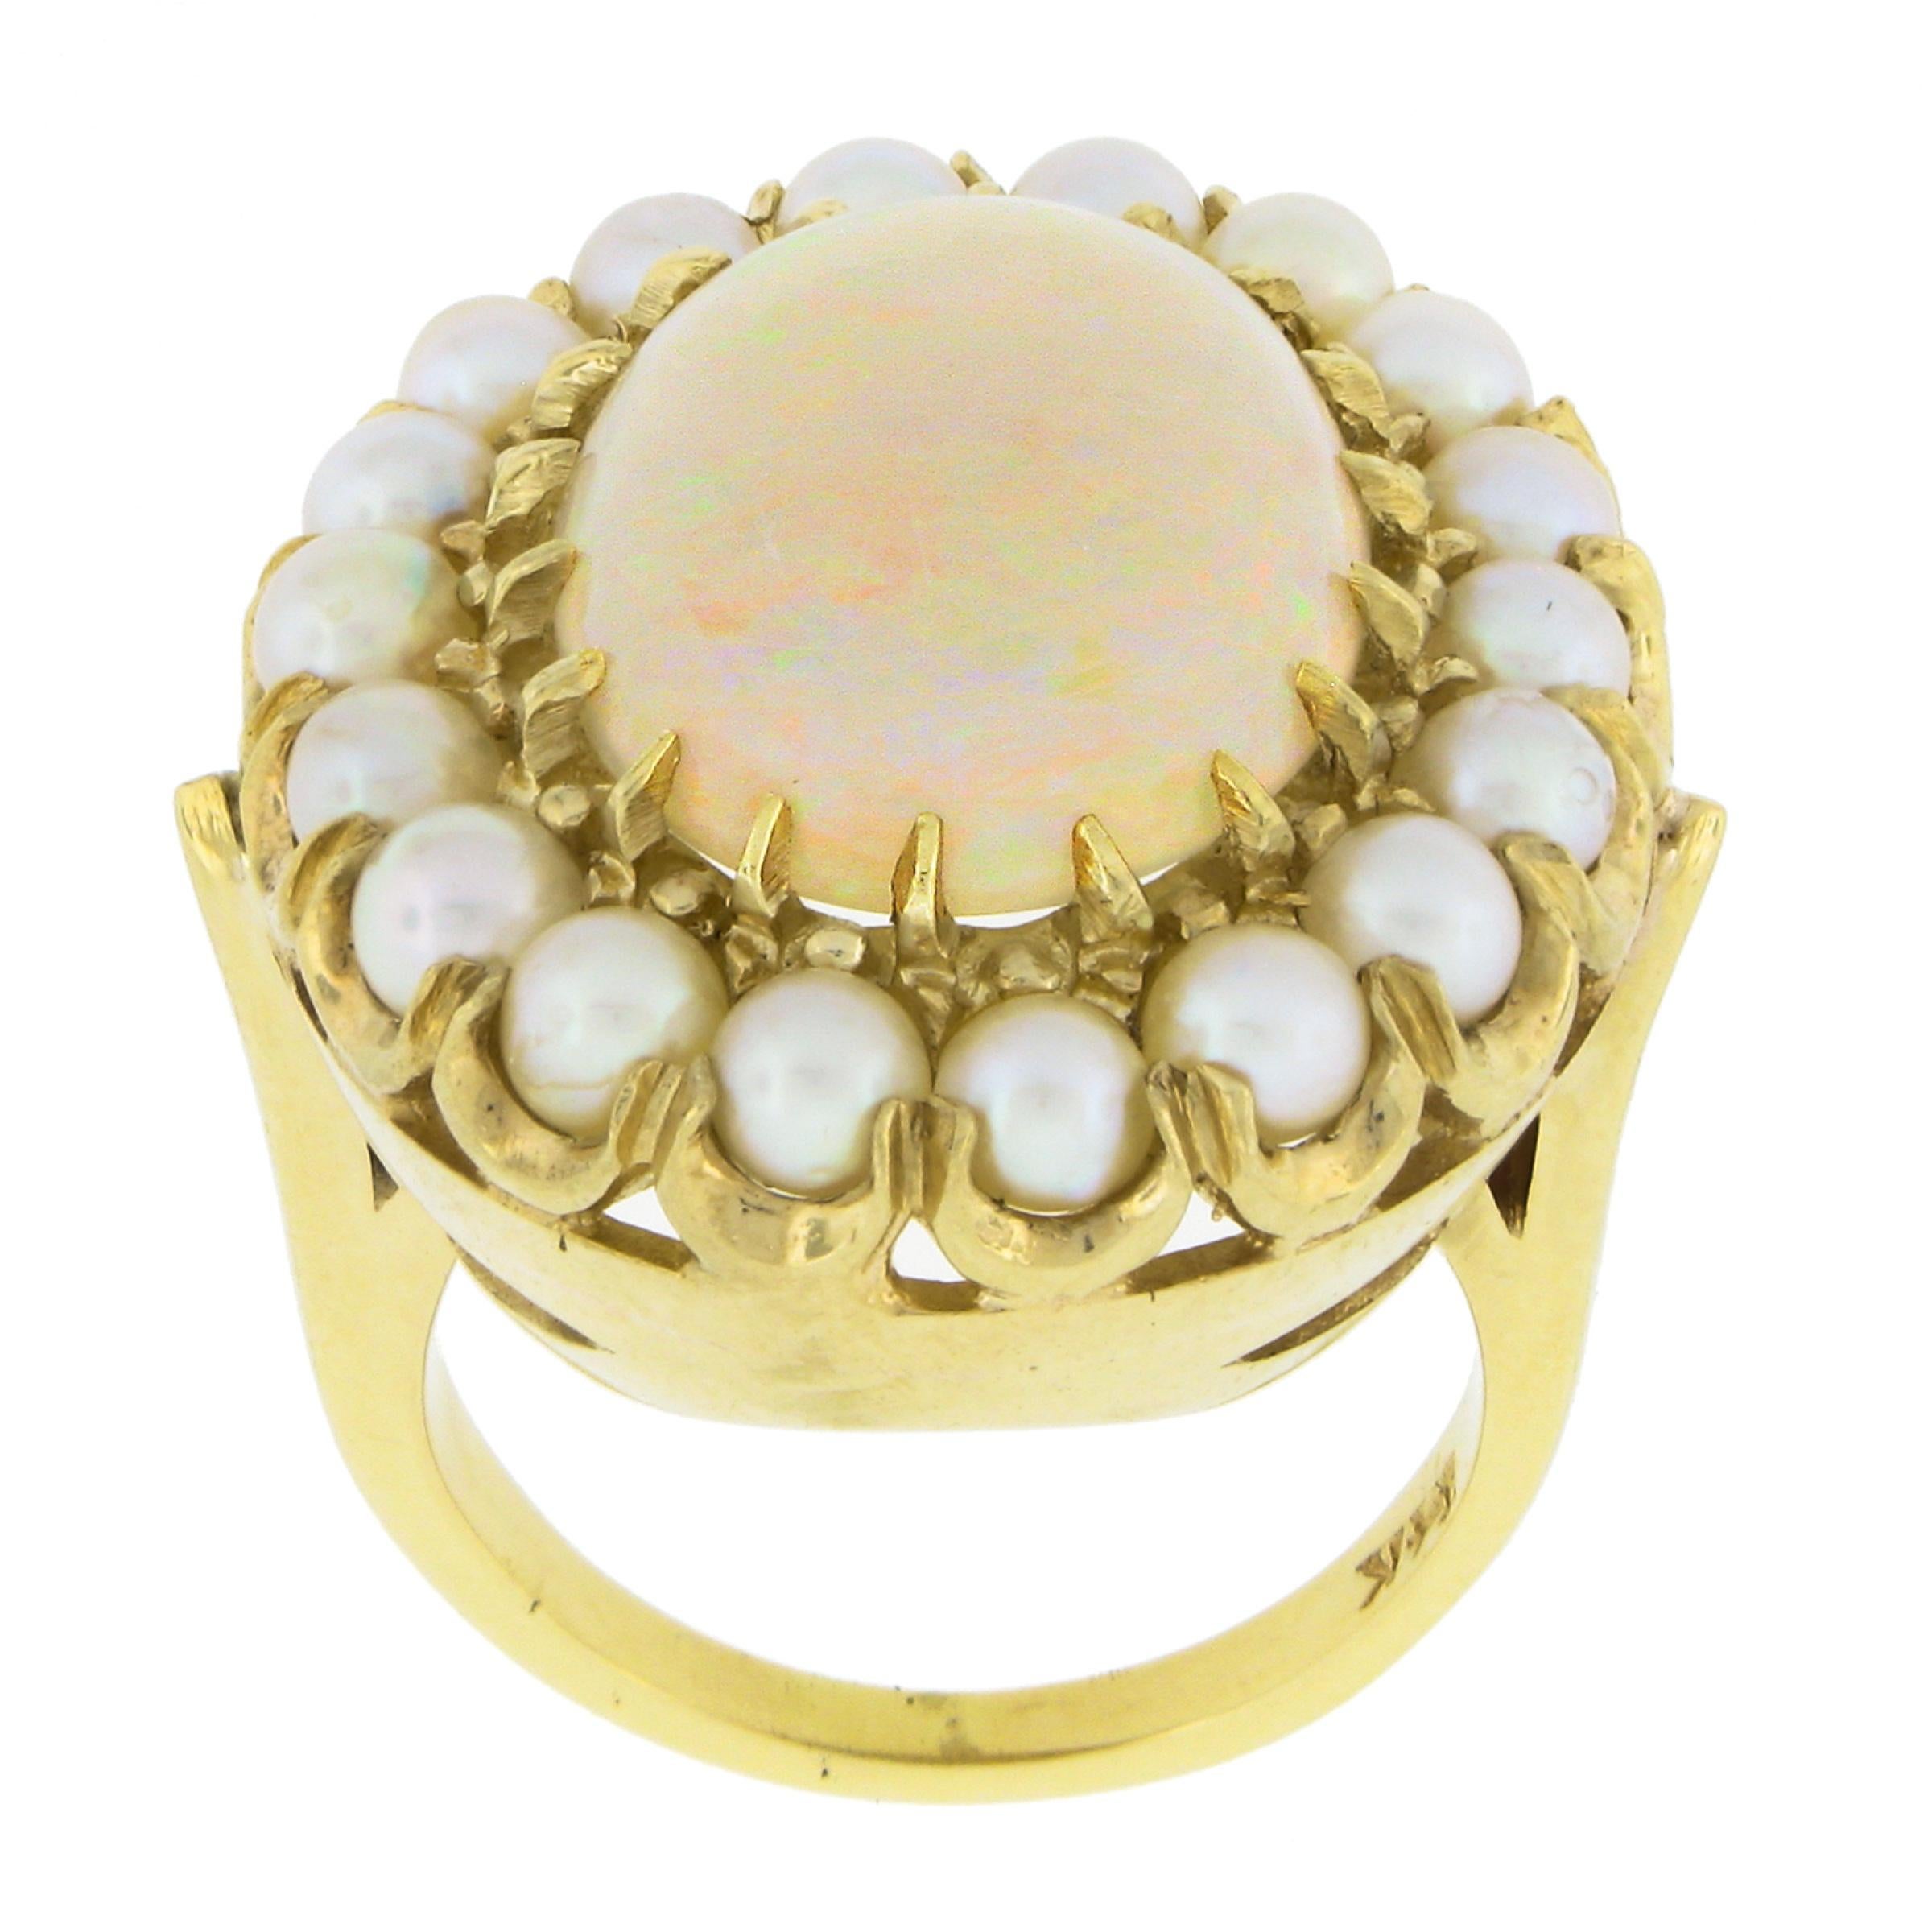 Vintage 14K Yellow Gold Oval Cabochon Opal Solitaire & Pearl Bead Cocktail Ring For Sale 1